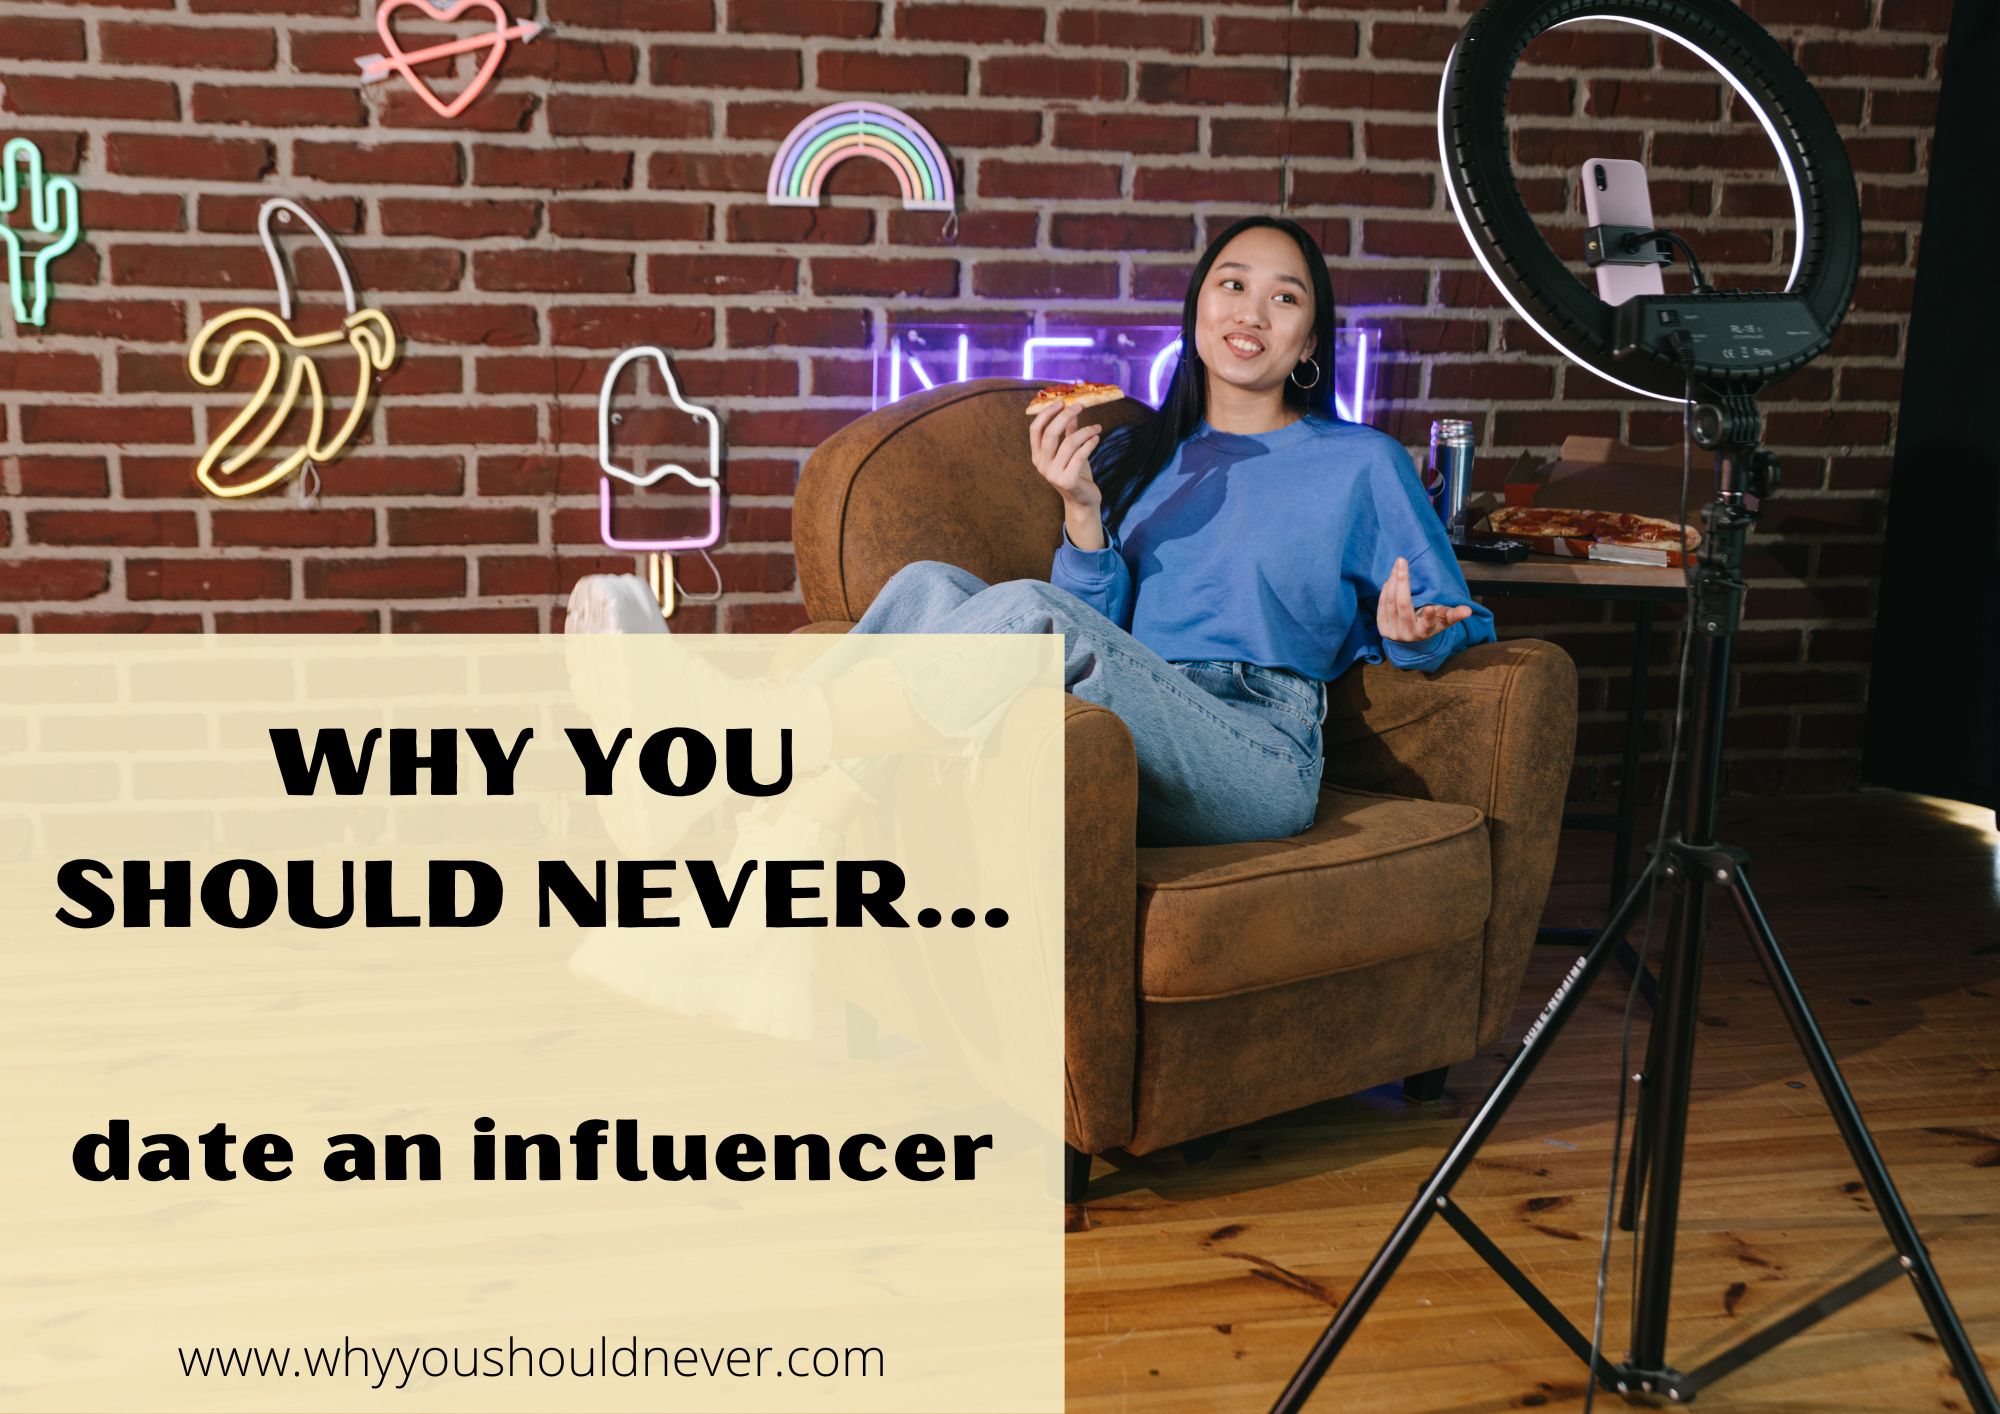 Why You Should Never Date An Influencer